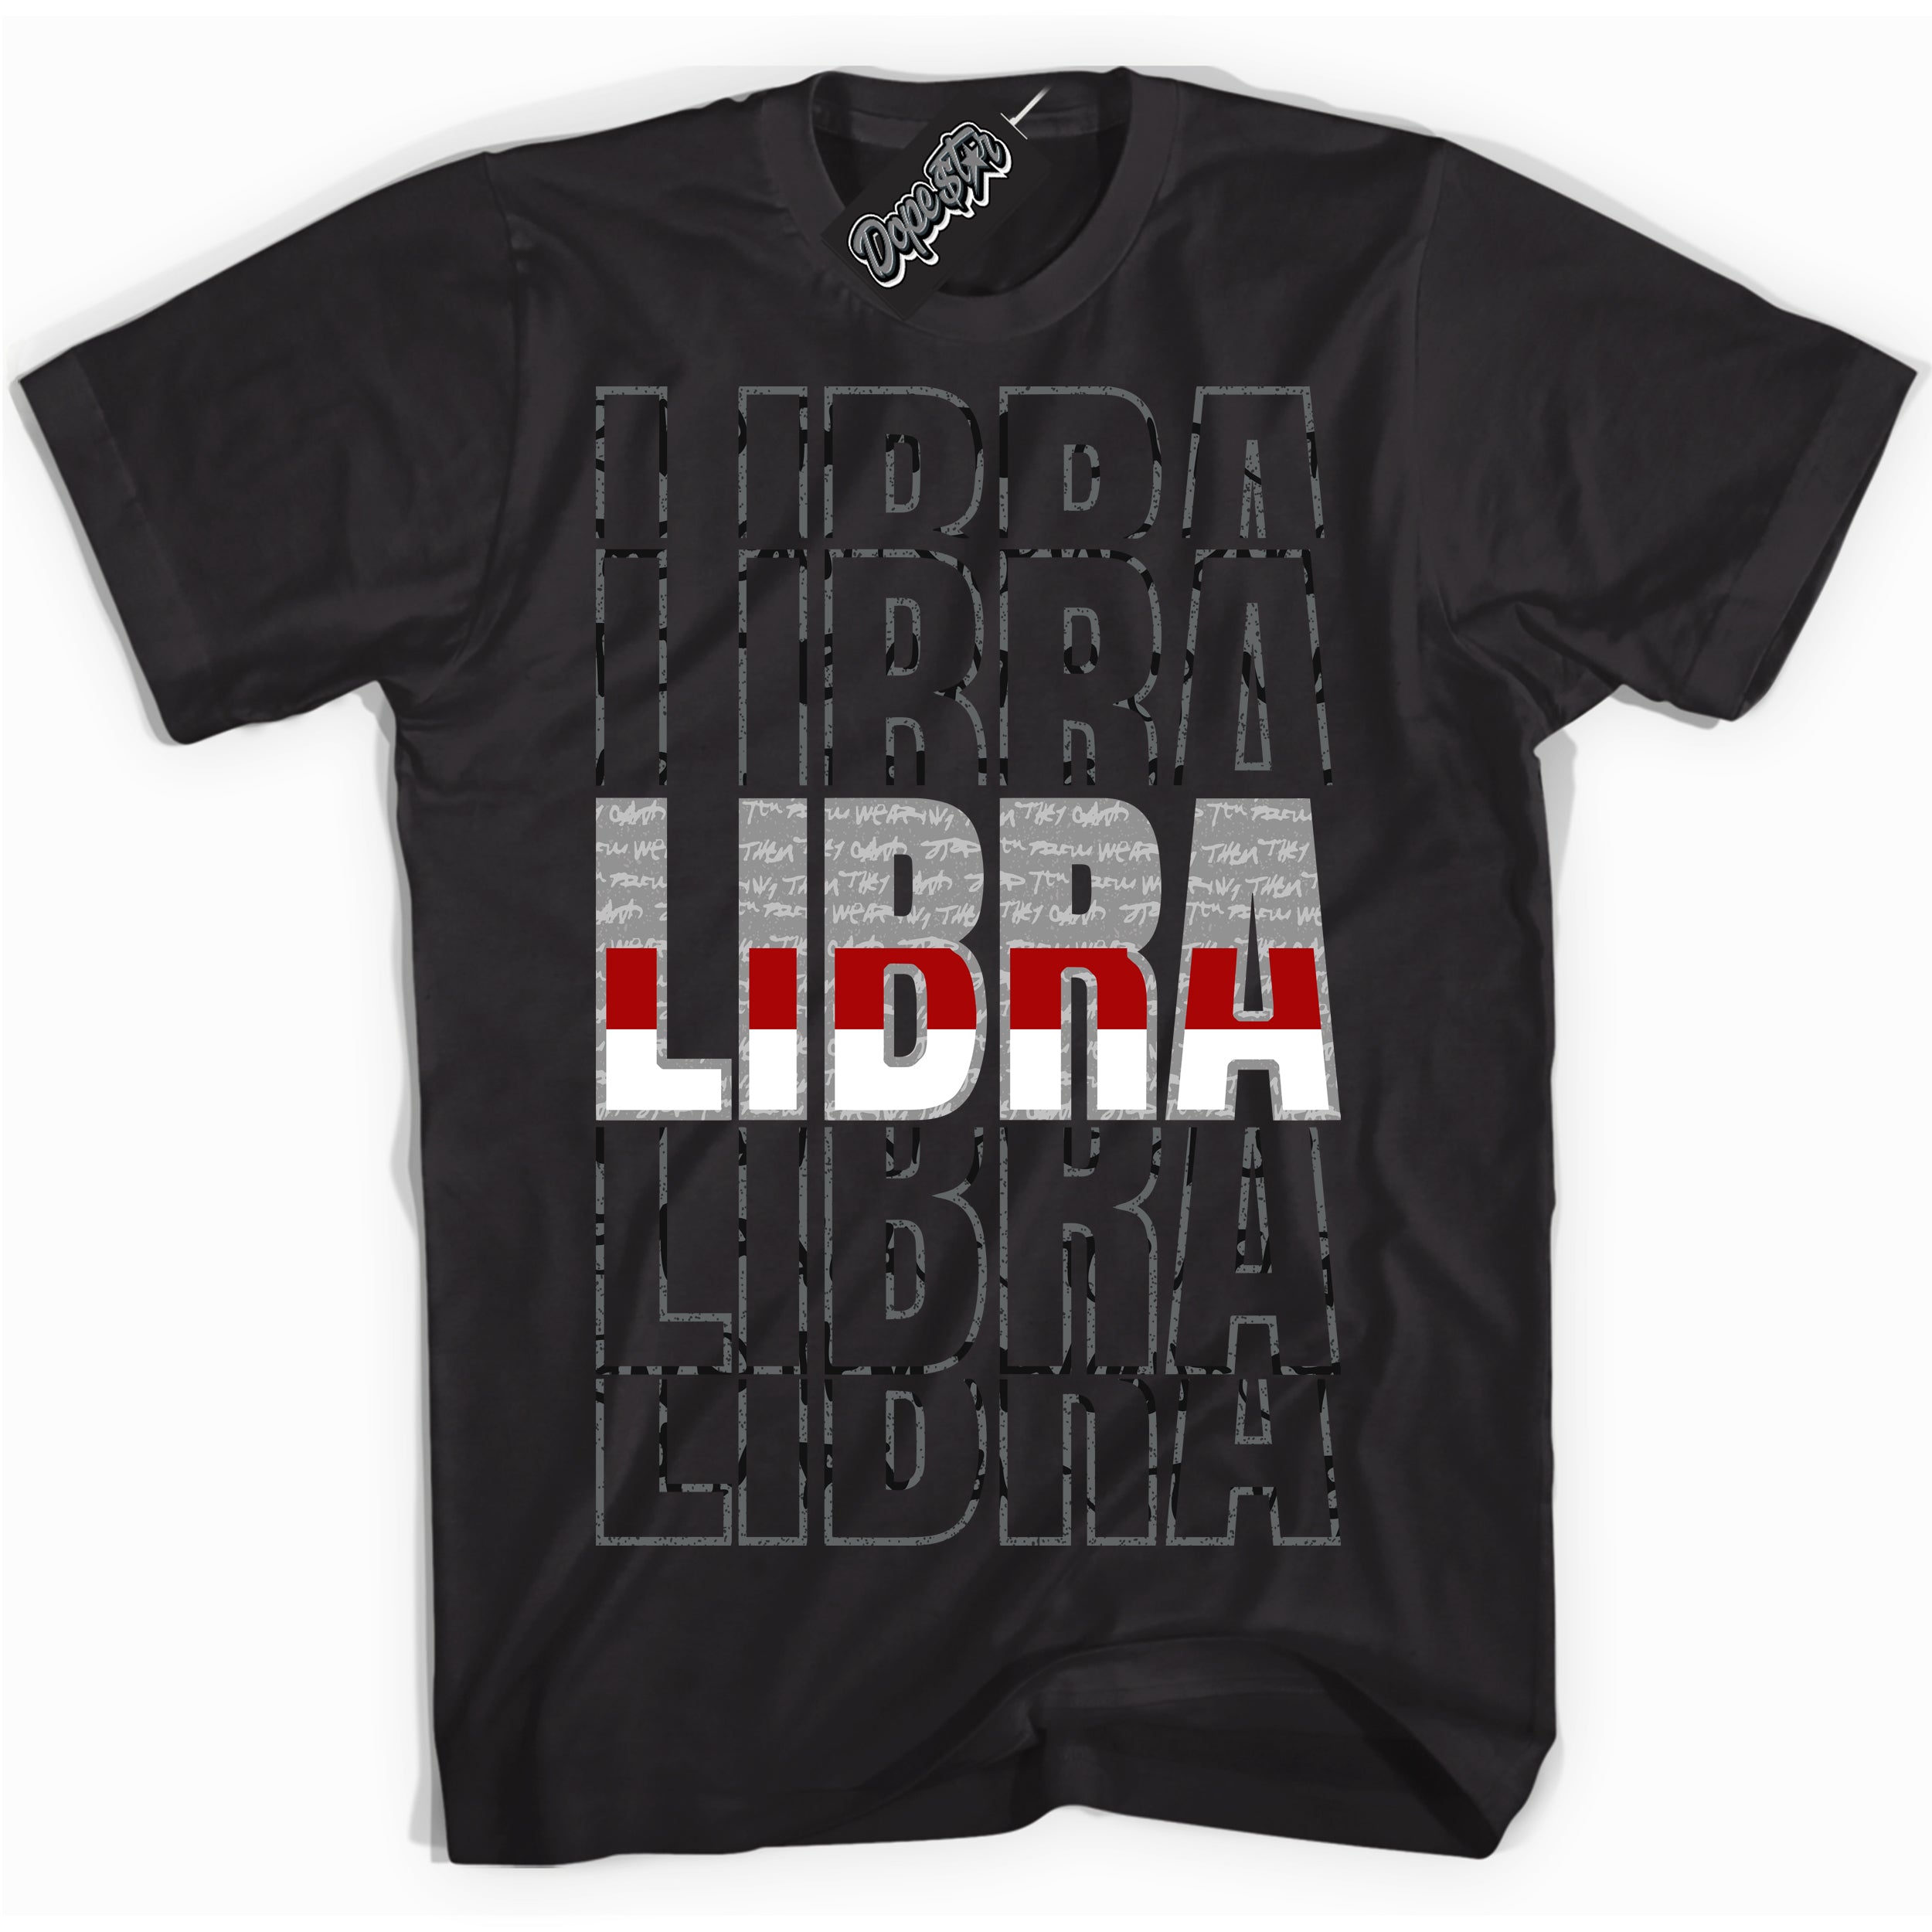 Cool Black Shirt with “ Libra ” design that perfectly matches Rebellionaire 1s Sneakers.